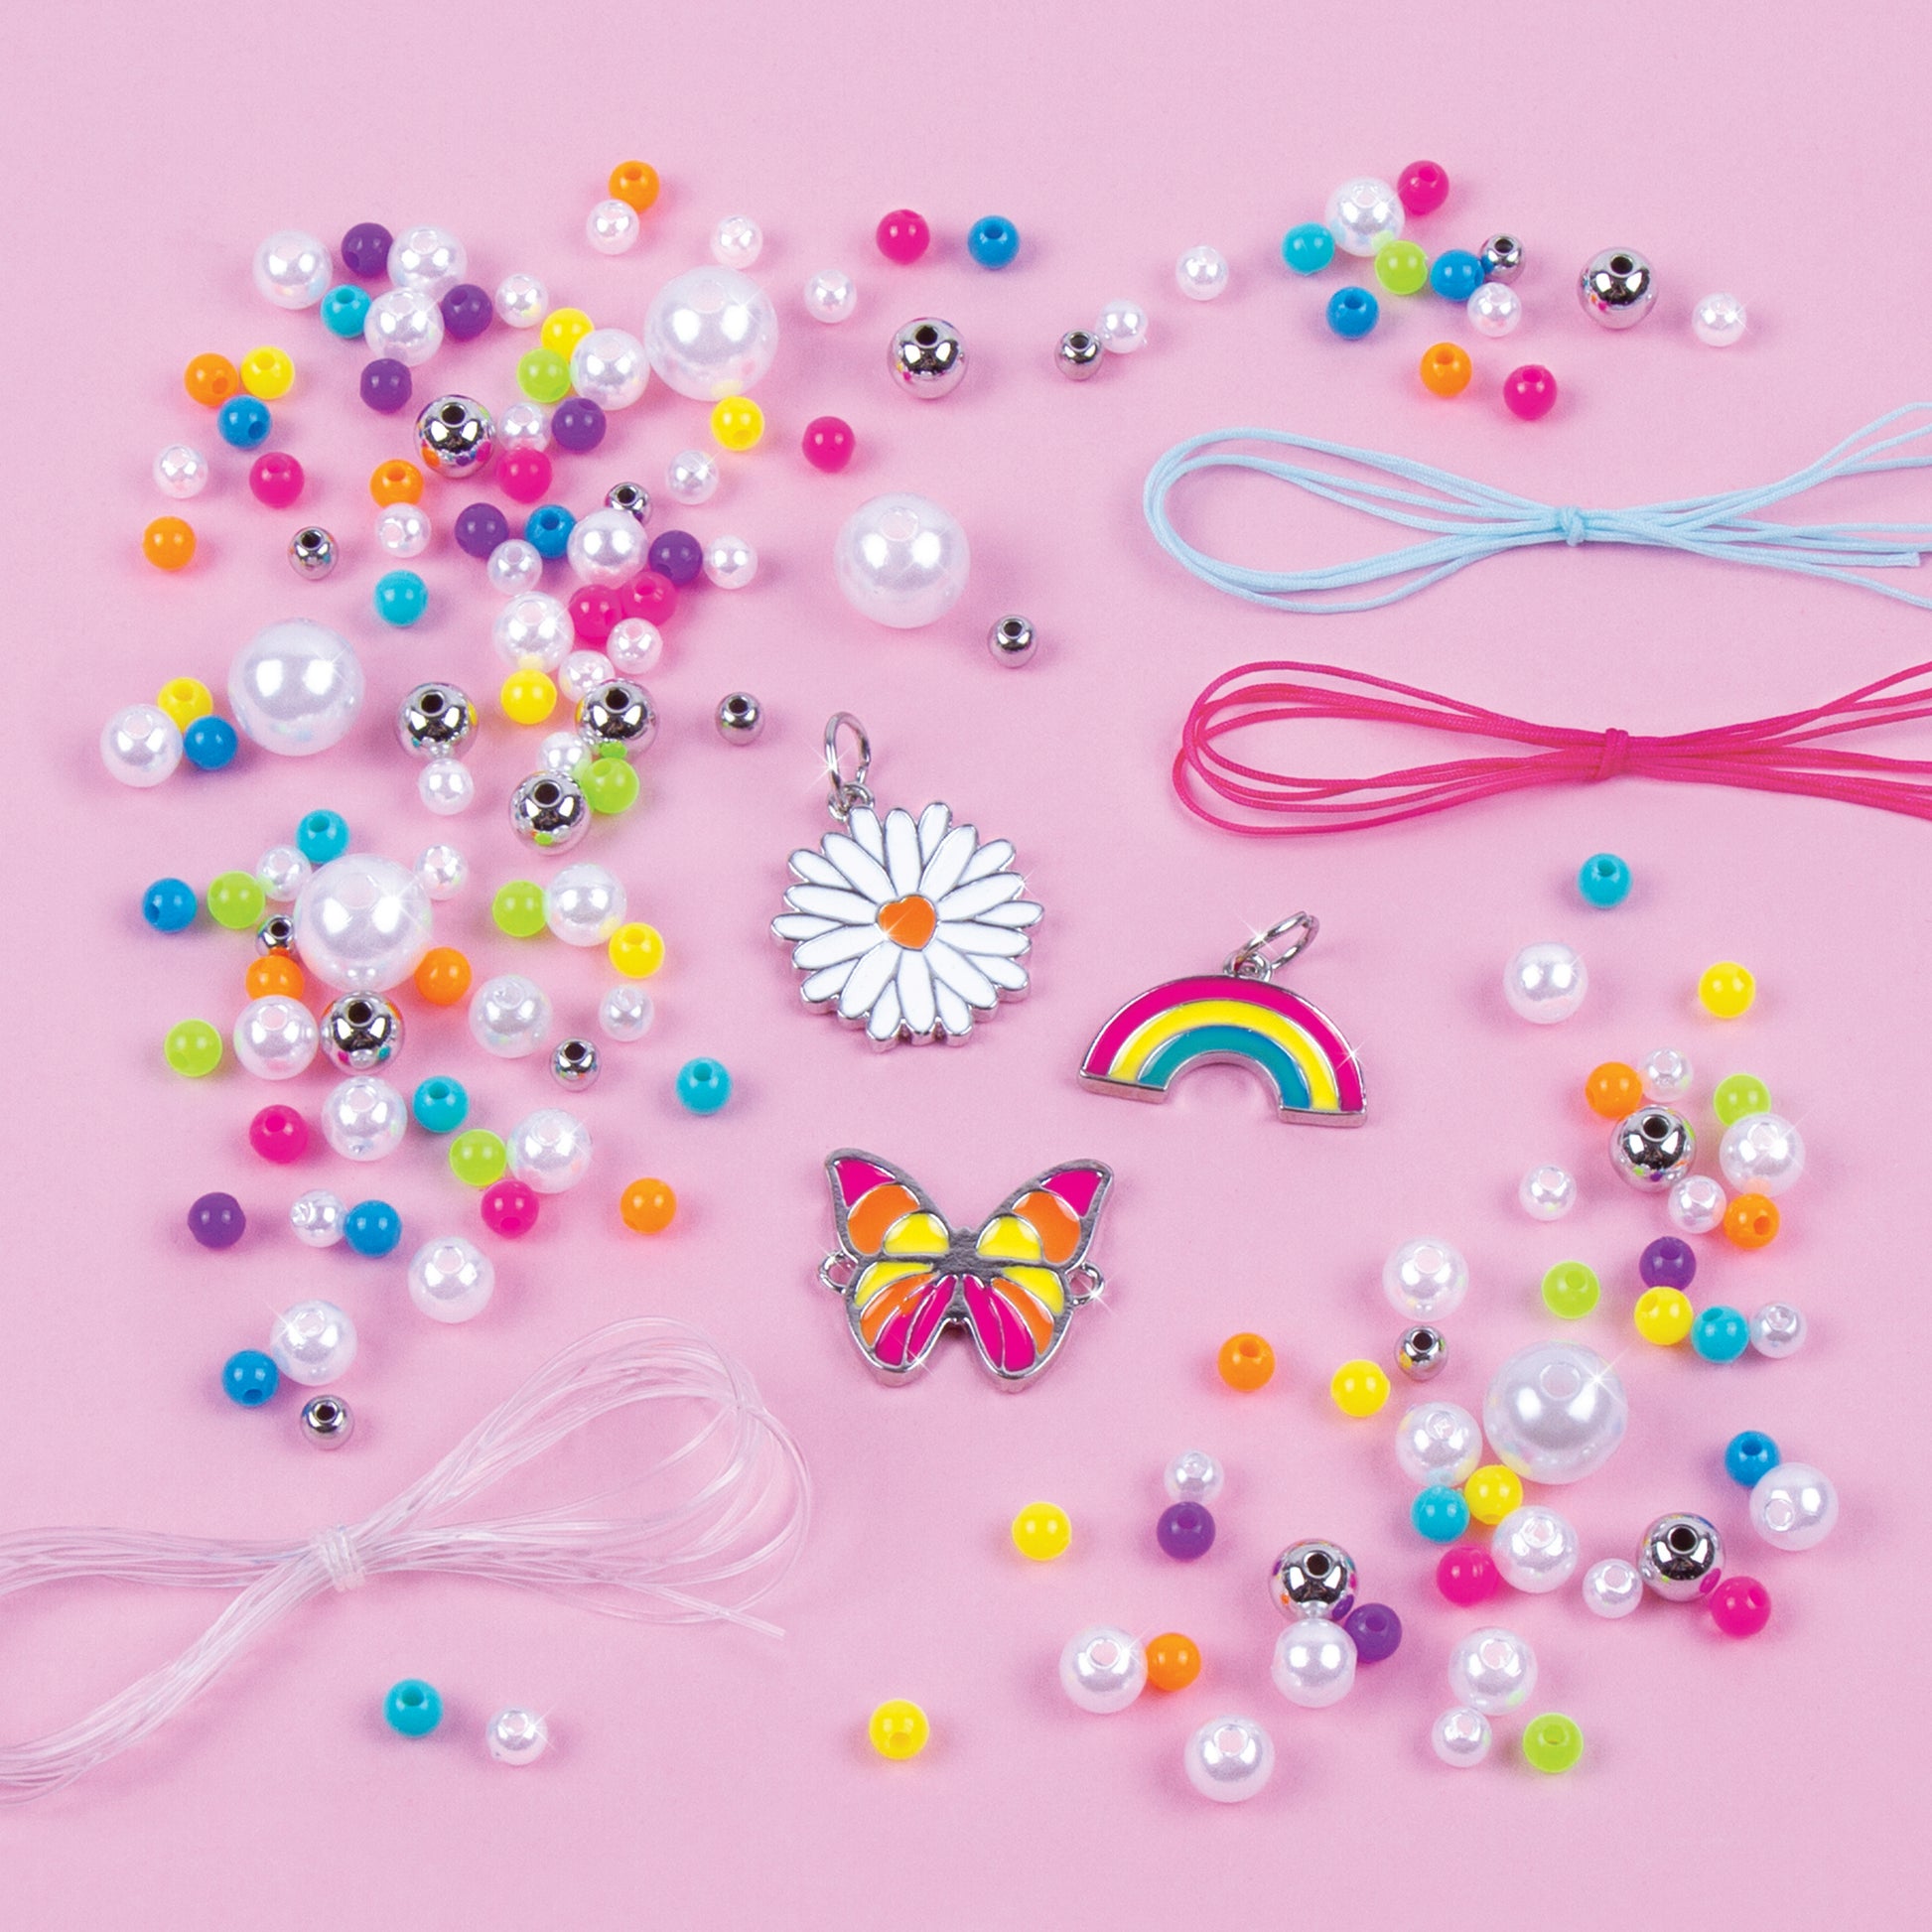 Make It Real: Rainbow Dream Jewelry Kit - Create 3 Unique Charm Bracelets &  A Ring, 123 Pieces, Includes Play Tray, All-in-One, DIY Colorful Bead